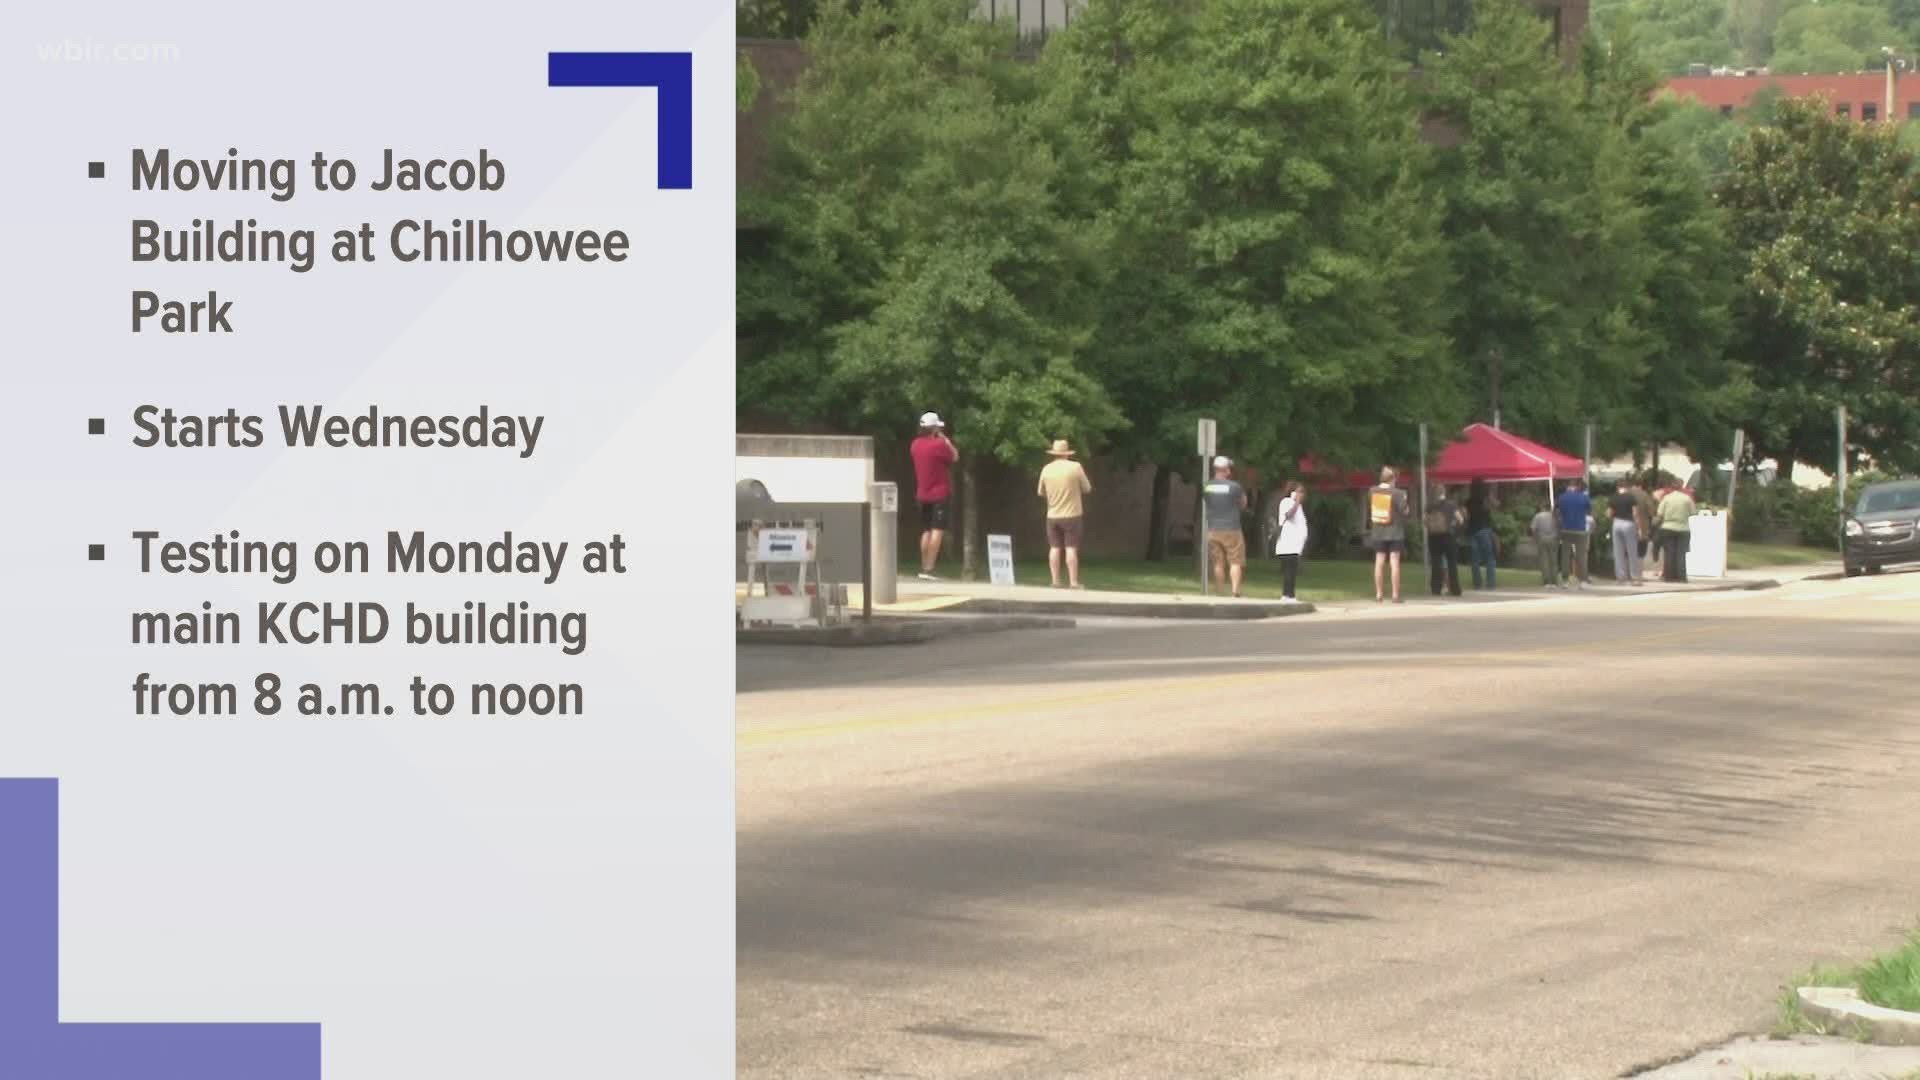 Starting on Wednesday, testing will move to the Jacob Building at Chilhowee Park.